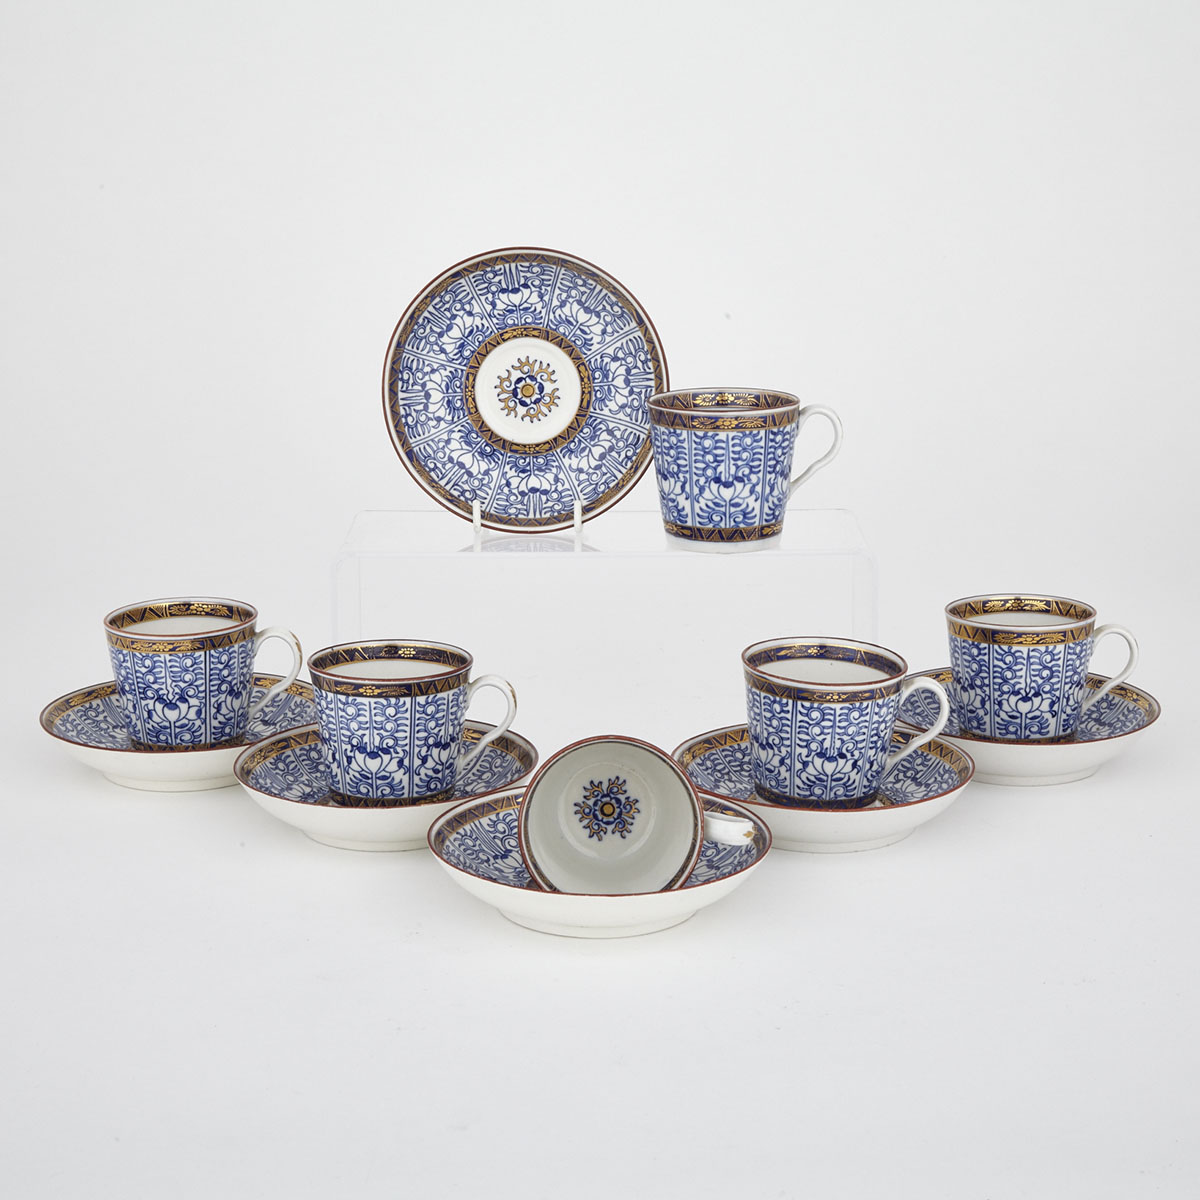 Six Worcester ‘Royal Lily’ Coffee Cups and Saucers, late 18th century